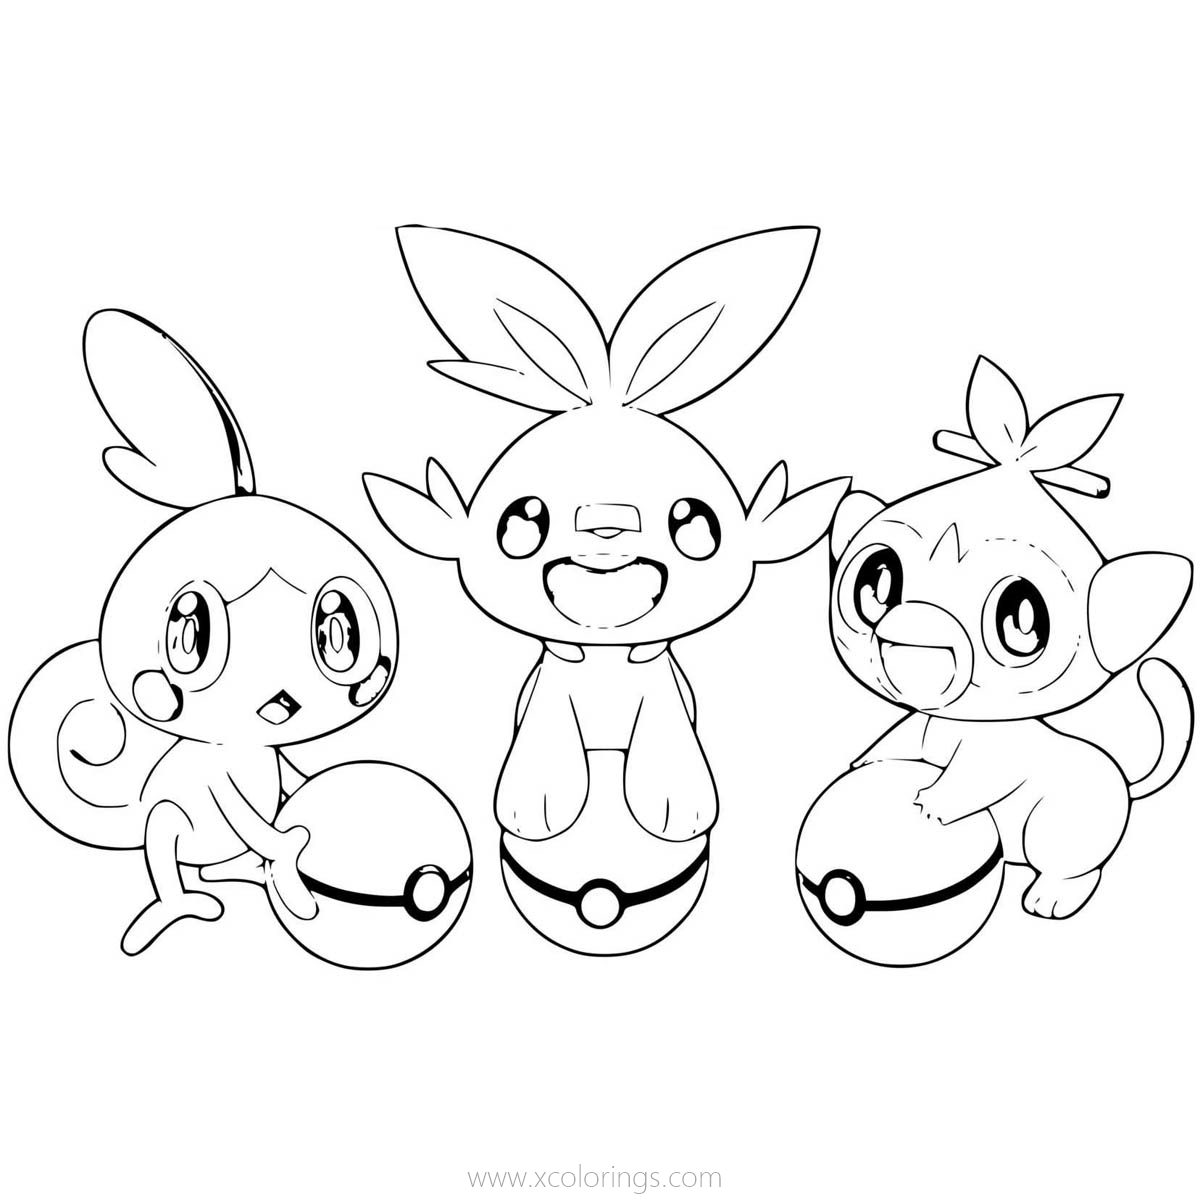 Free Pokemon Coloring Pages Sobble Scorbunny and Grookey with Poke Ball printable